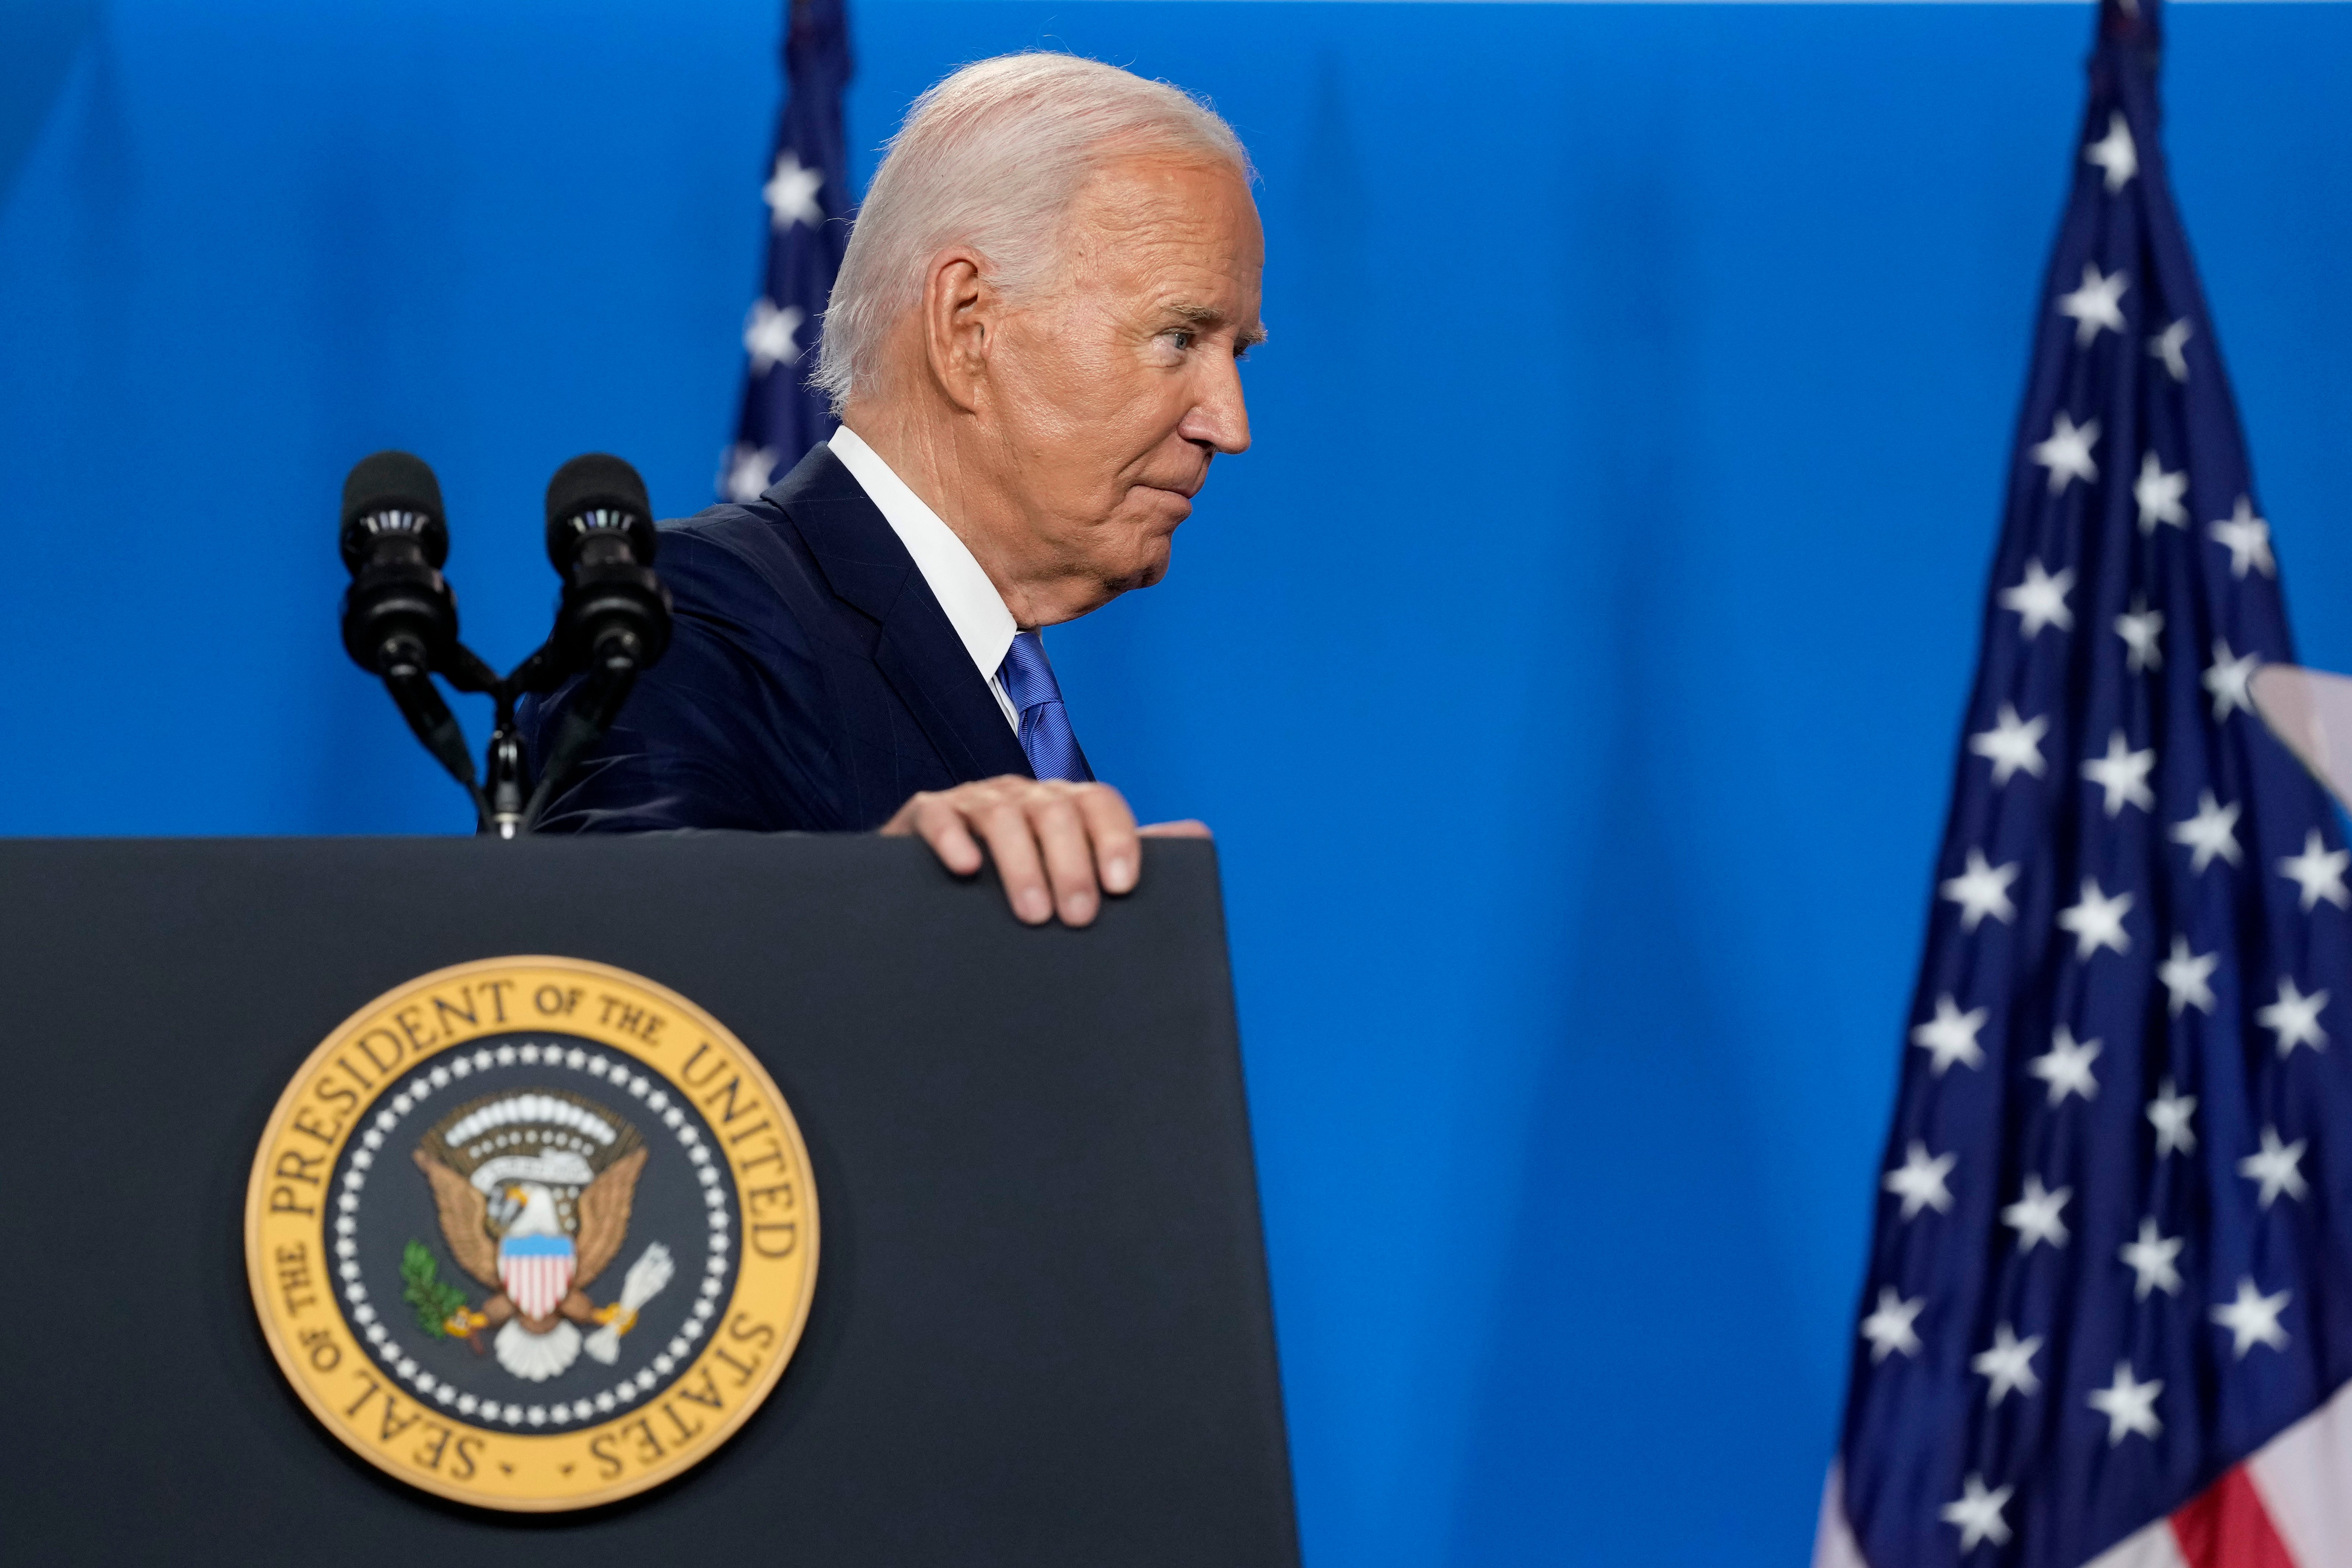 President Joe Biden departs the stage after speaking at a news conference following the NATO summit in Washington DC on July 11.